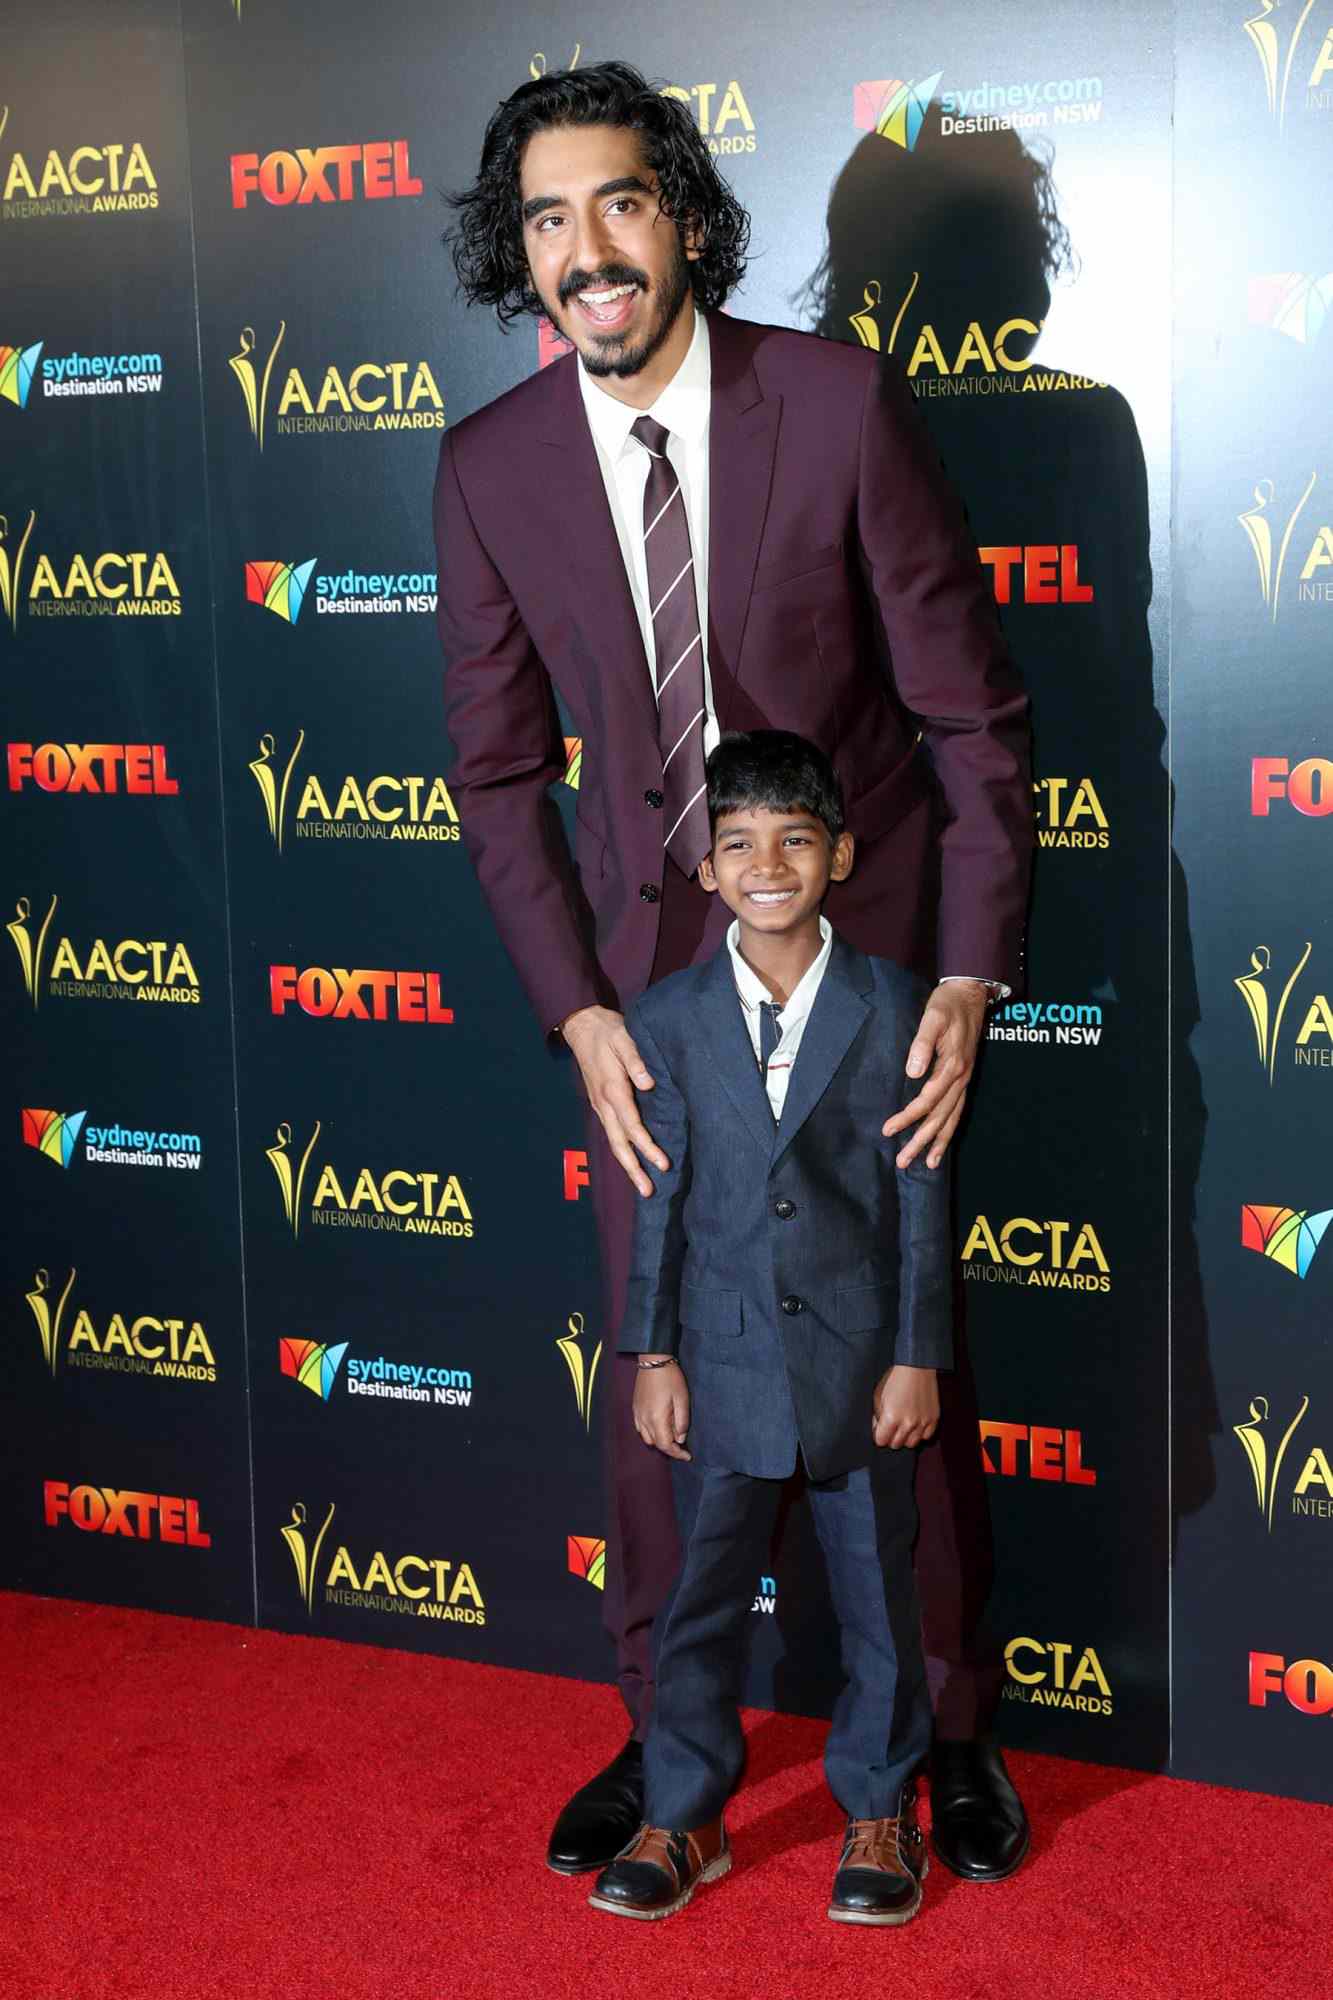 Dev Patel and Sunny Pawar at the 6th AACTA International Awards in Los Angeles on January 6, 2017